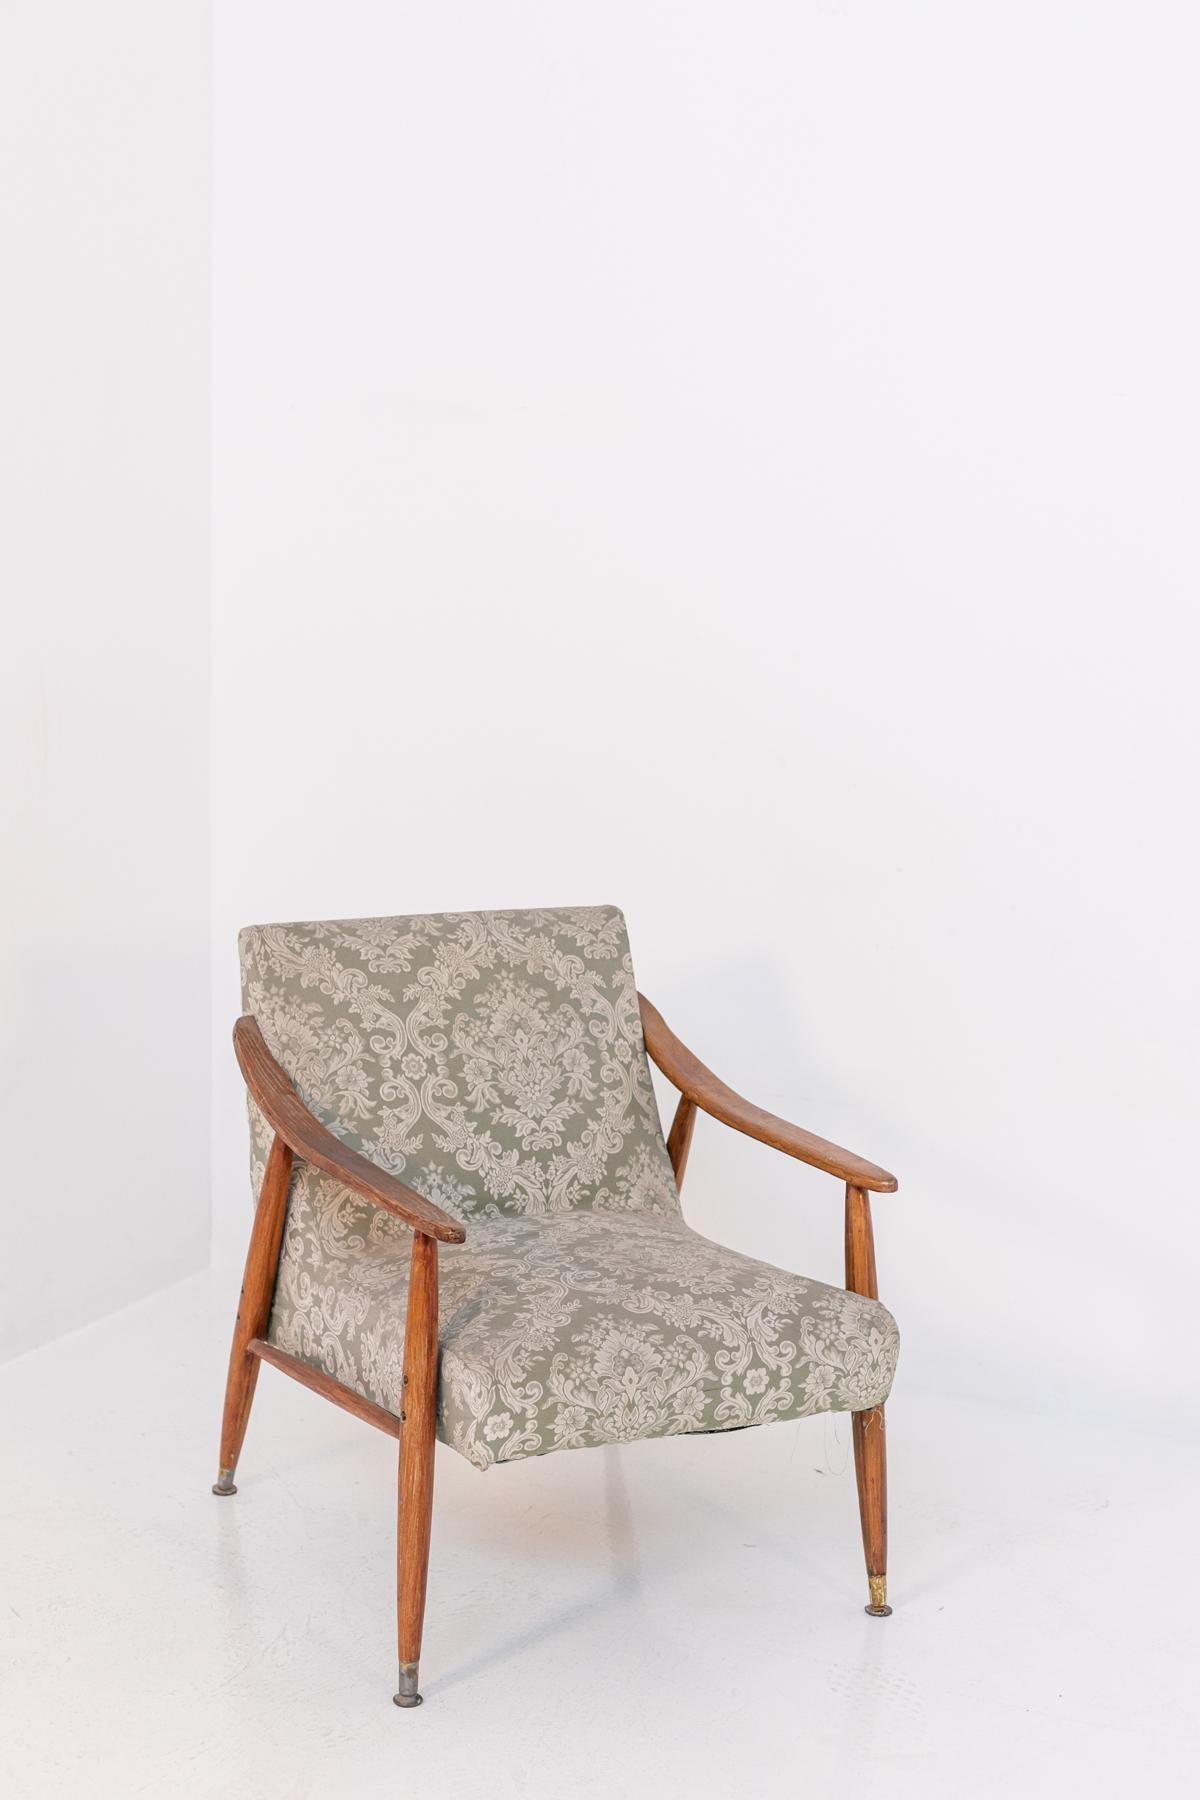 Mid-20th Century Nordic Armchair in Wood and Damask Fabric For Sale